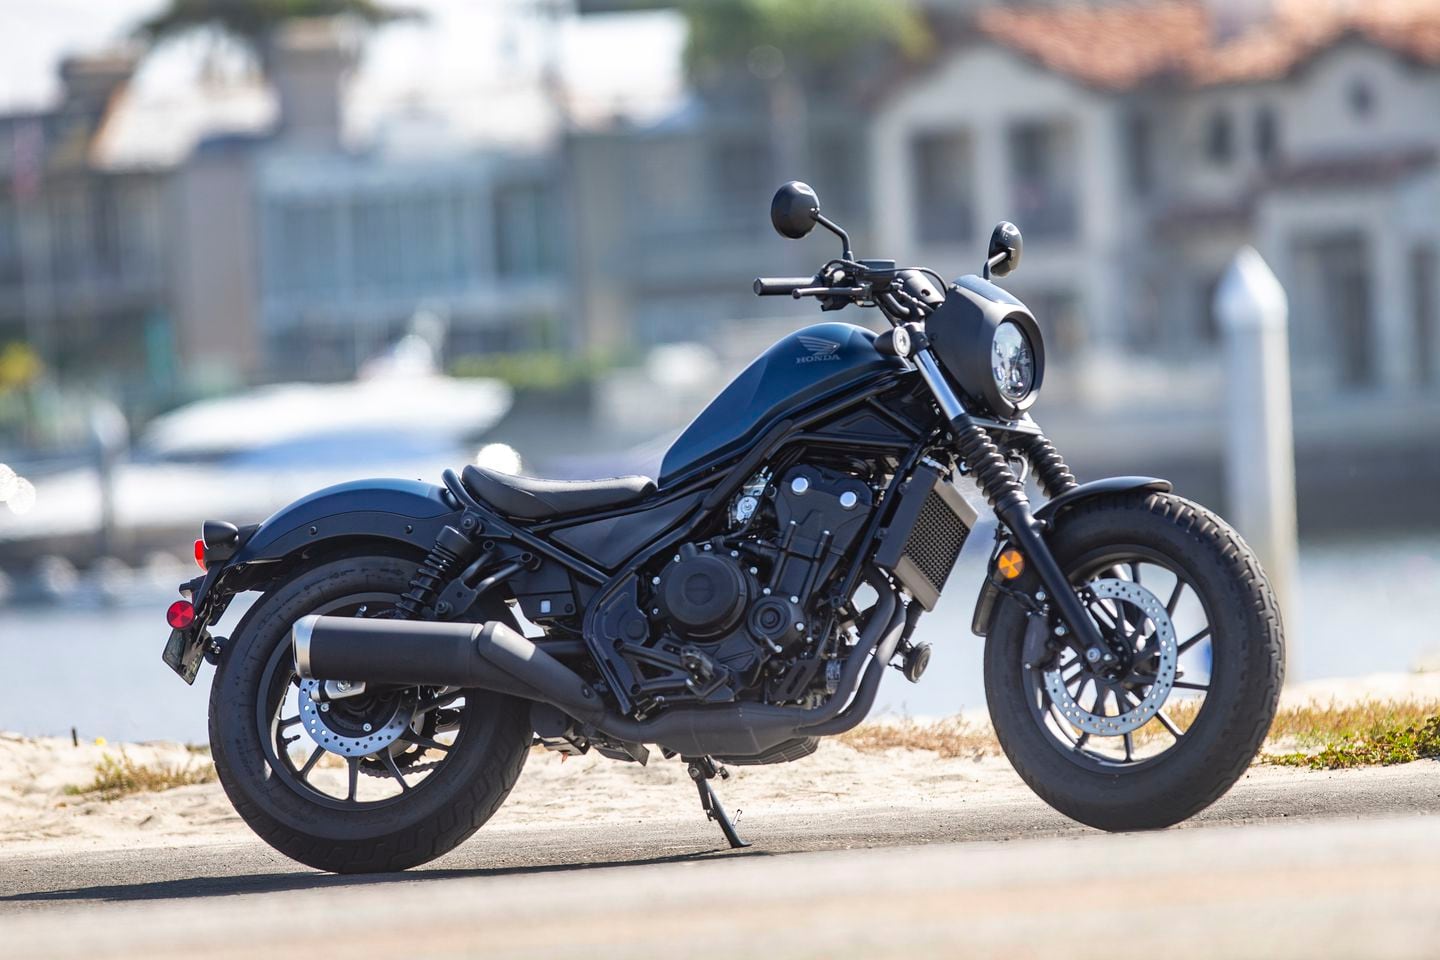 Honda Rebel 500 First Ride Review Cycle World